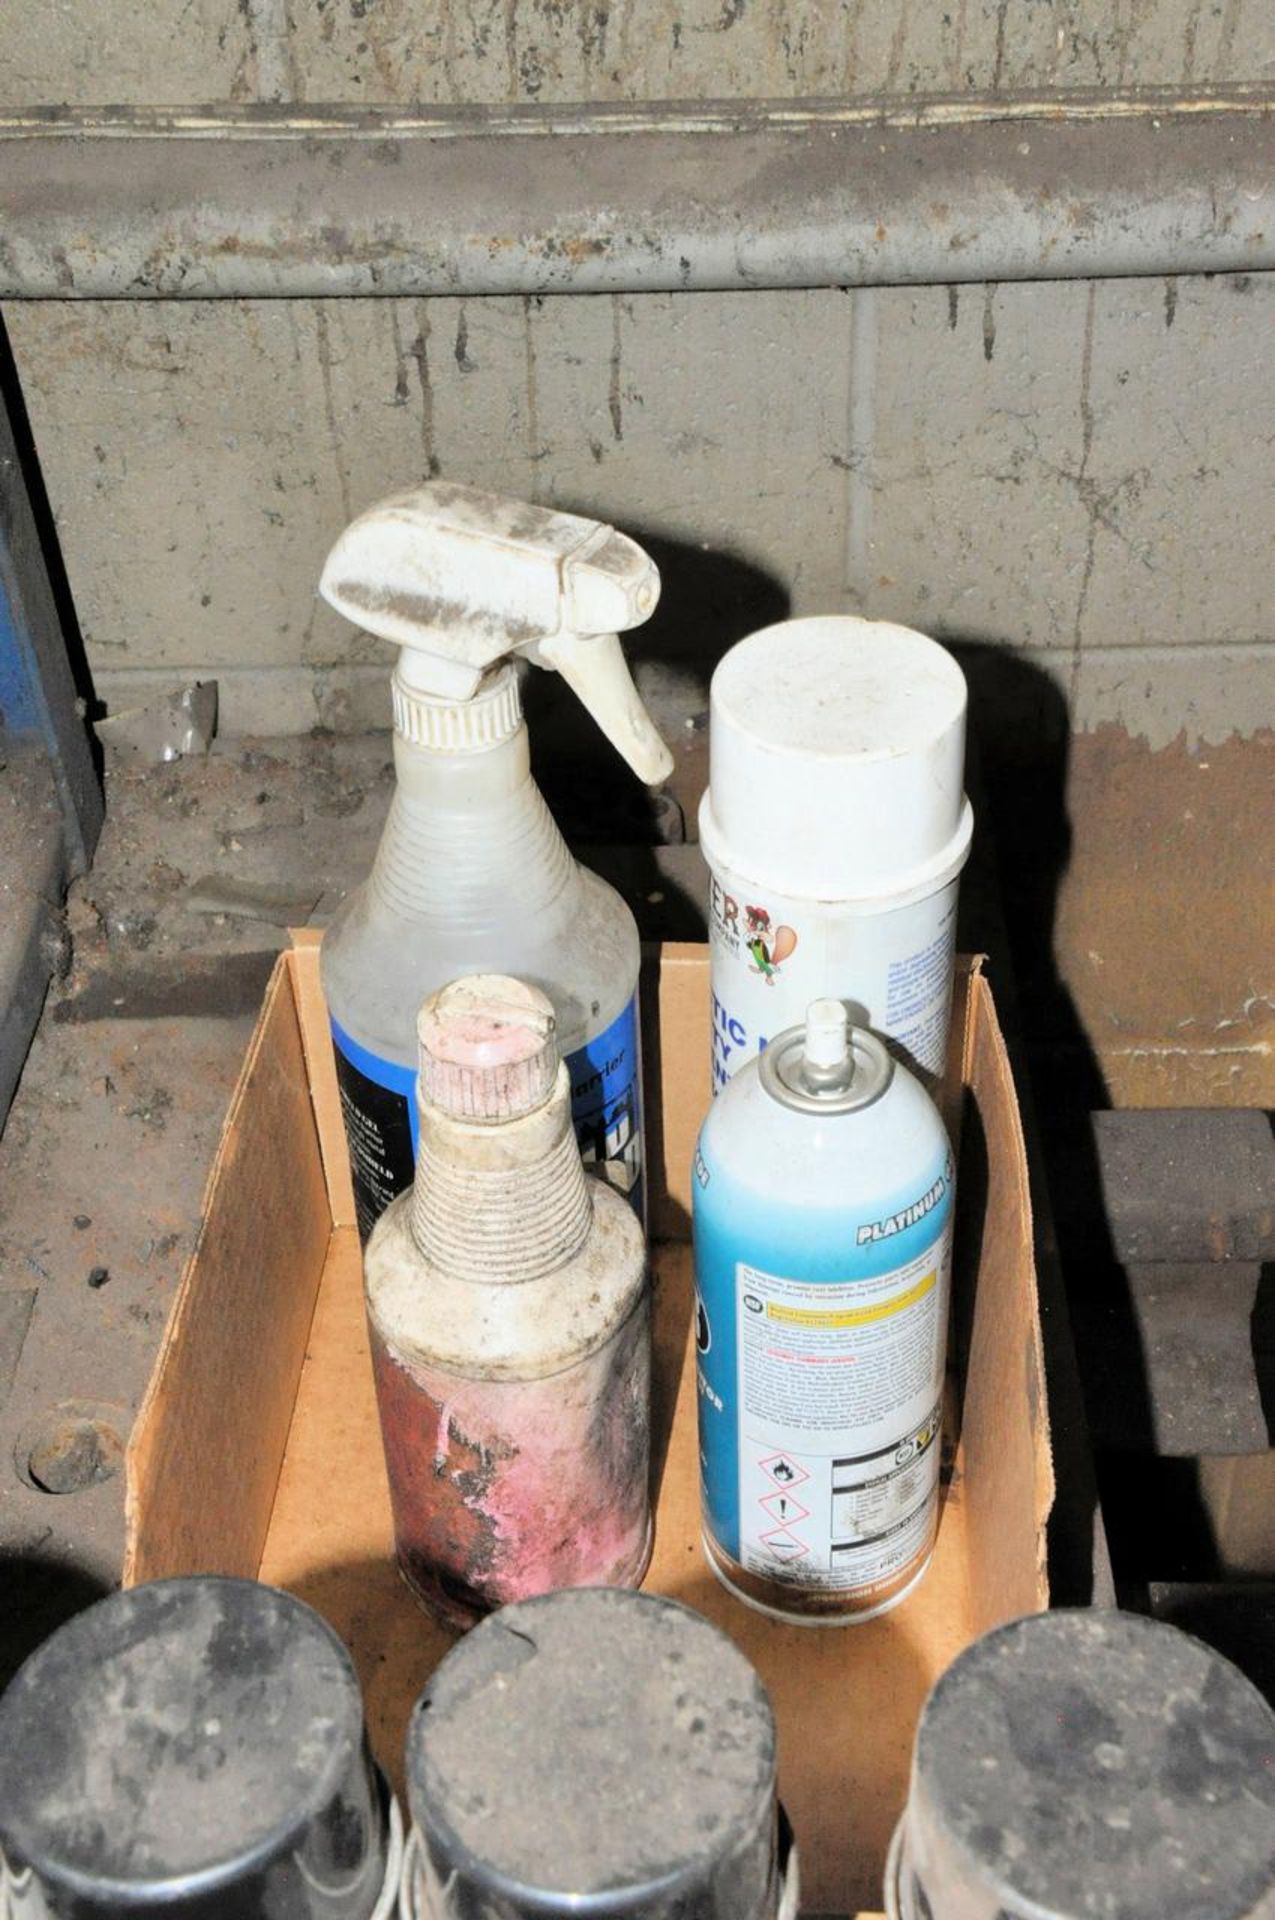 Lot of Welding Parts and Aerosols in (5) Boxes - Image 3 of 3